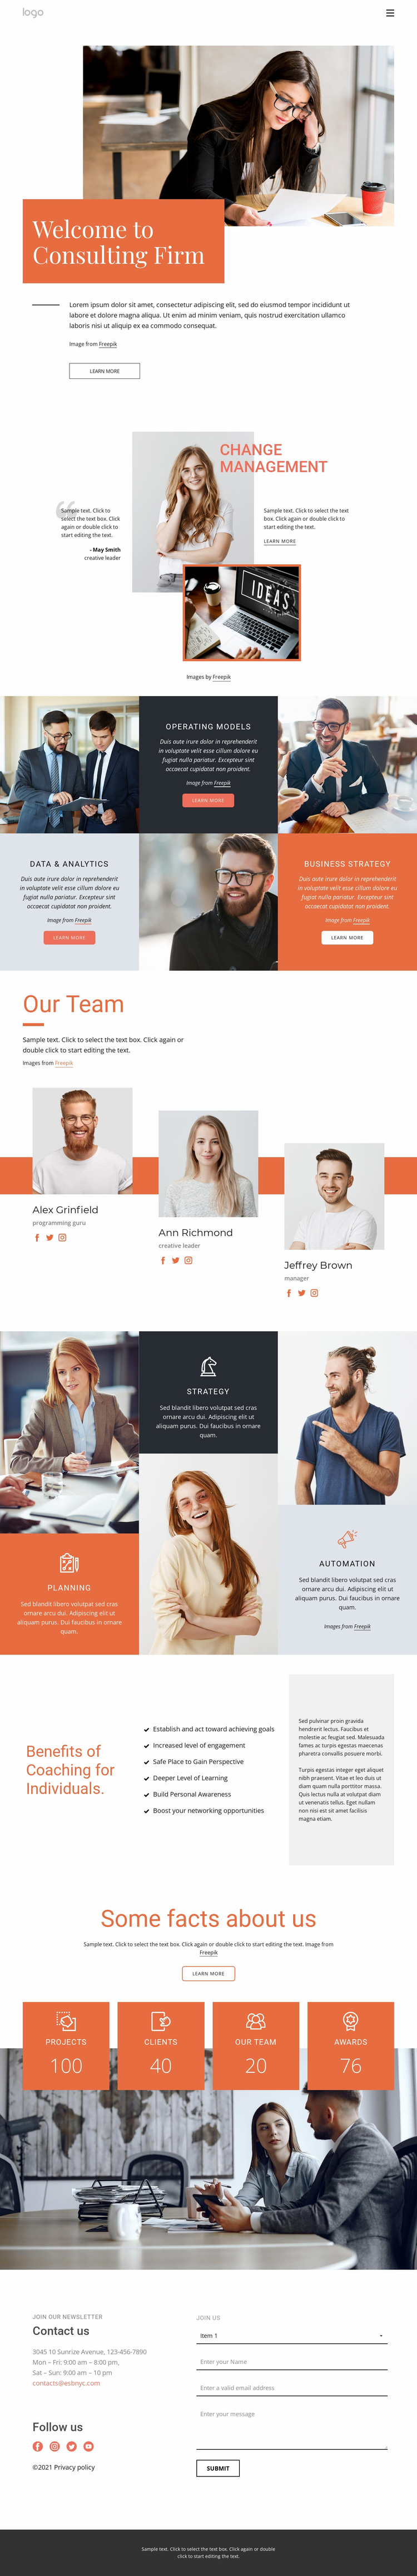 Consulting firm Landing Page